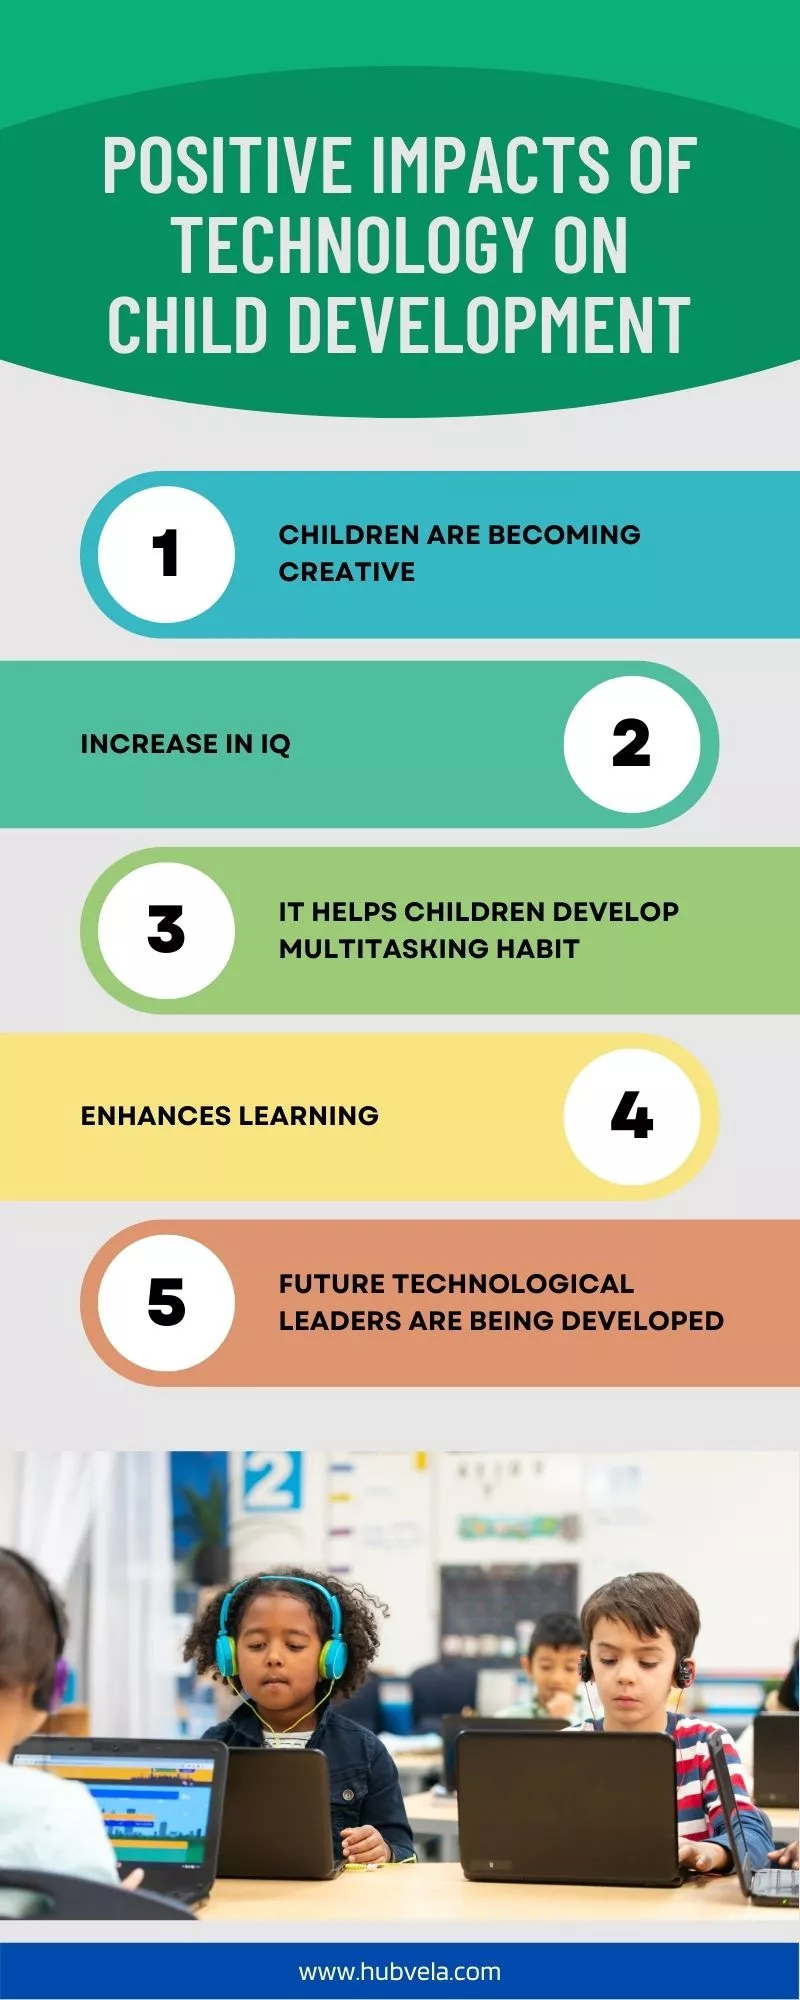 Positive Impacts of Technology on Child Development infographic